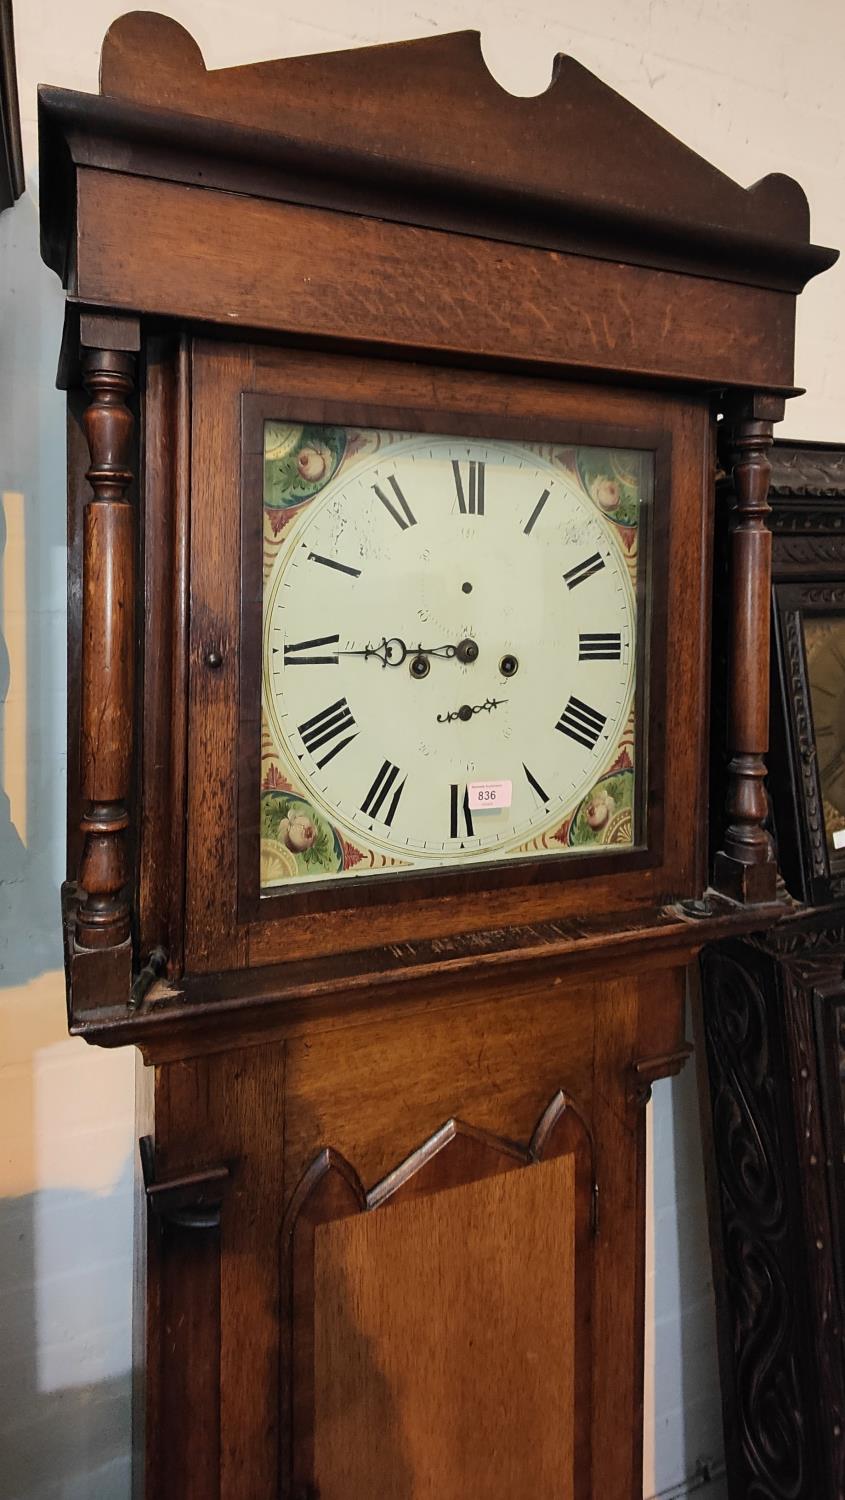 An early 19th century oak and mahogany longcase clock with architectural pediment and turned columns - Image 2 of 2